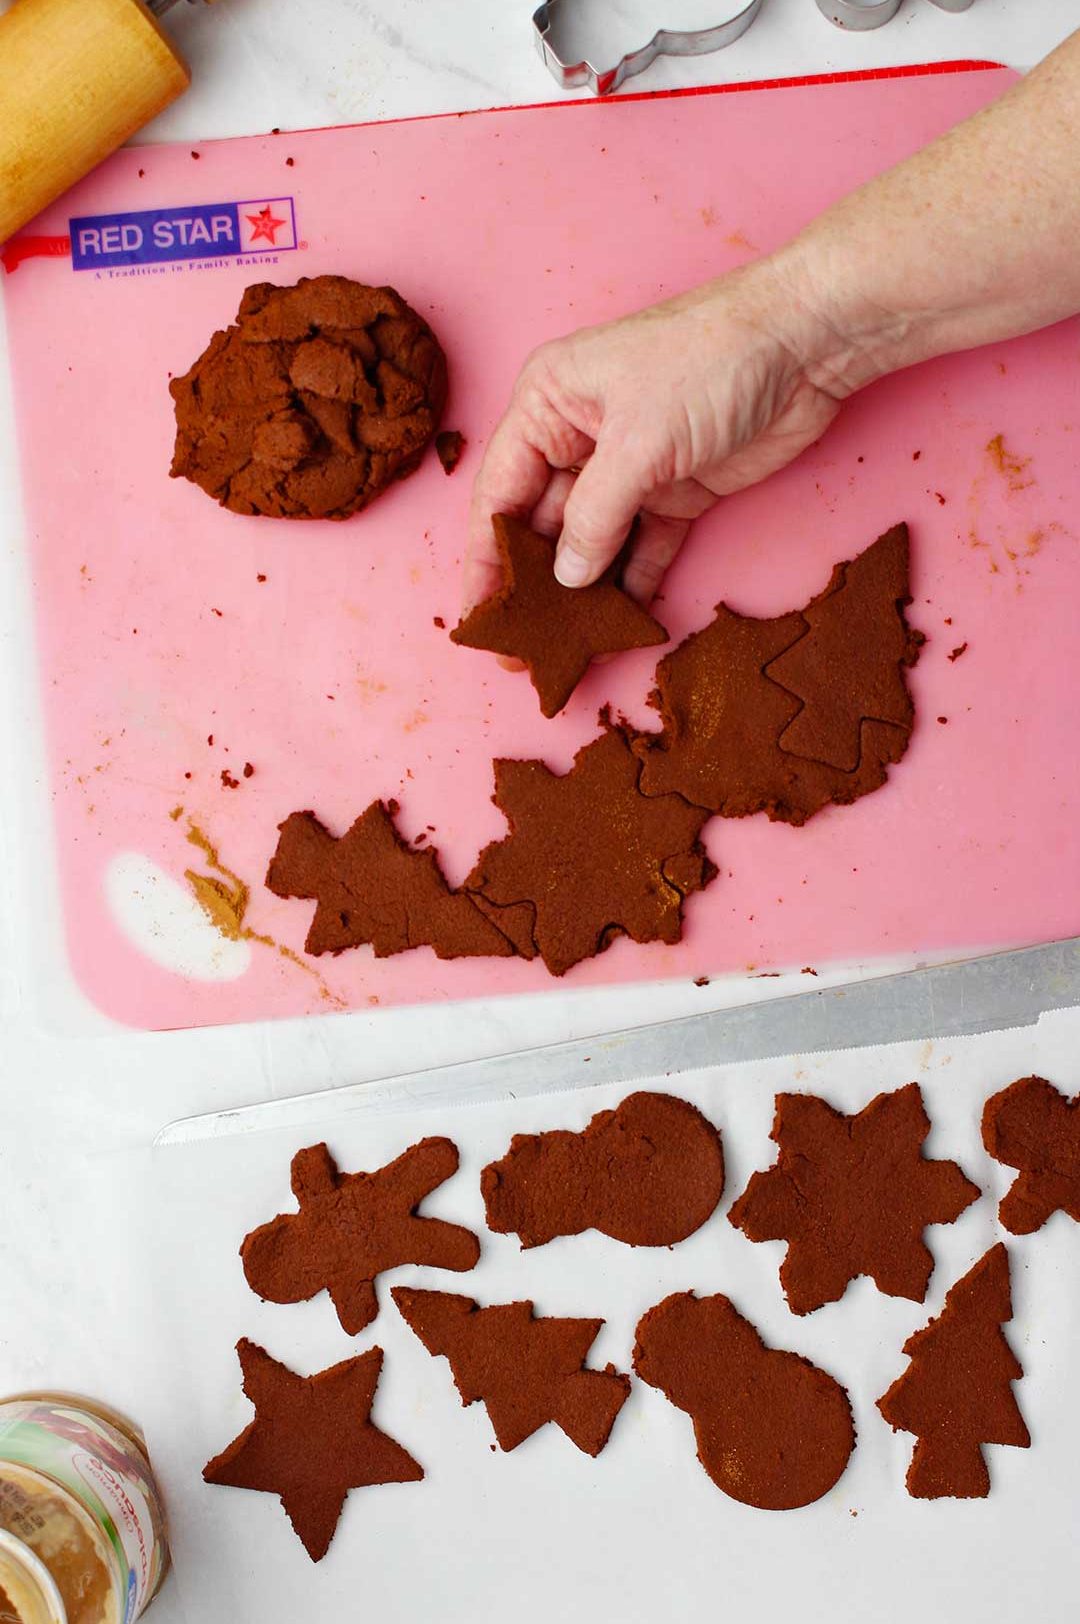 Hand removing star shaped dough from a pink cutting mat with other ornaments on parchment to the left of it.